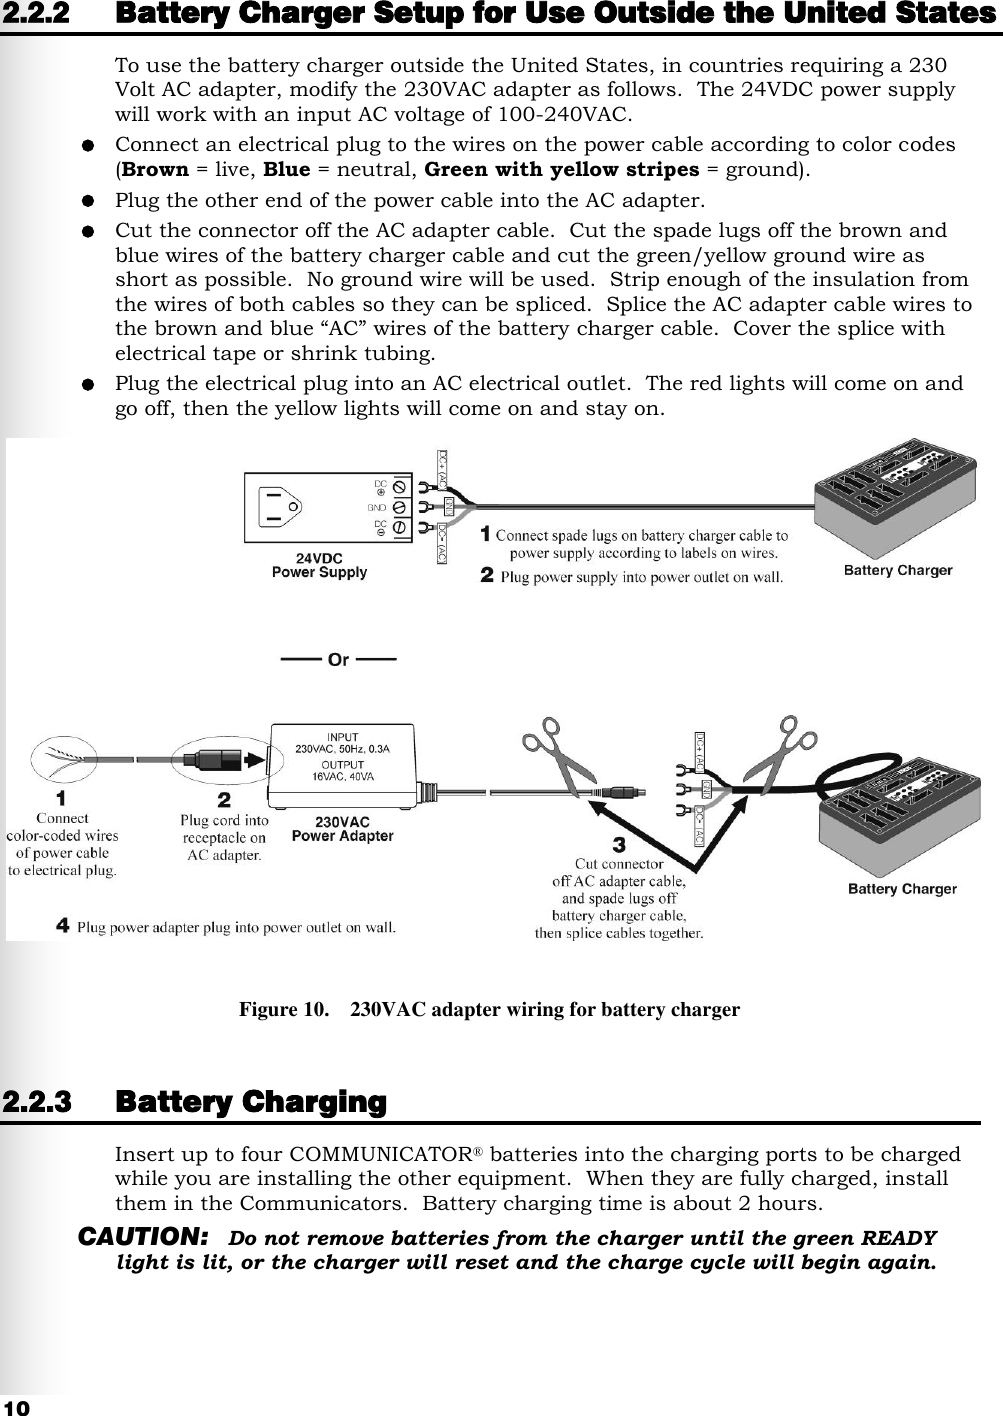   10 2.2.2 Battery Charger Setup for Use Outside the United States To use the battery charger outside the United States, in countries requiring a 230 Volt AC adapter, modify the 230VAC adapter as follows.  The 24VDC power supply will work with an input AC voltage of 100-240VAC.  Connect an electrical plug to the wires on the power cable according to color codes (Brown = live, Blue = neutral, Green with yellow stripes = ground).  Plug the other end of the power cable into the AC adapter.  Cut the connector off the AC adapter cable.  Cut the spade lugs off the brown and blue wires of the battery charger cable and cut the green/yellow ground wire as short as possible.  No ground wire will be used.  Strip enough of the insulation from the wires of both cables so they can be spliced.  Splice the AC adapter cable wires to the brown and blue “AC” wires of the battery charger cable.  Cover the splice with electrical tape or shrink tubing.  Plug the electrical plug into an AC electrical outlet.  The red lights will come on and go off, then the yellow lights will come on and stay on.  2.2.3 Battery Charging Insert up to four COMMUNICATOR® batteries into the charging ports to be charged while you are installing the other equipment.  When they are fully charged, install them in the Communicators.  Battery charging time is about 2 hours. CAUTION: Do not remove batteries from the charger until the green READY light is lit, or the charger will reset and the charge cycle will begin again. Figure 10.    230VAC adapter wiring for battery charger 